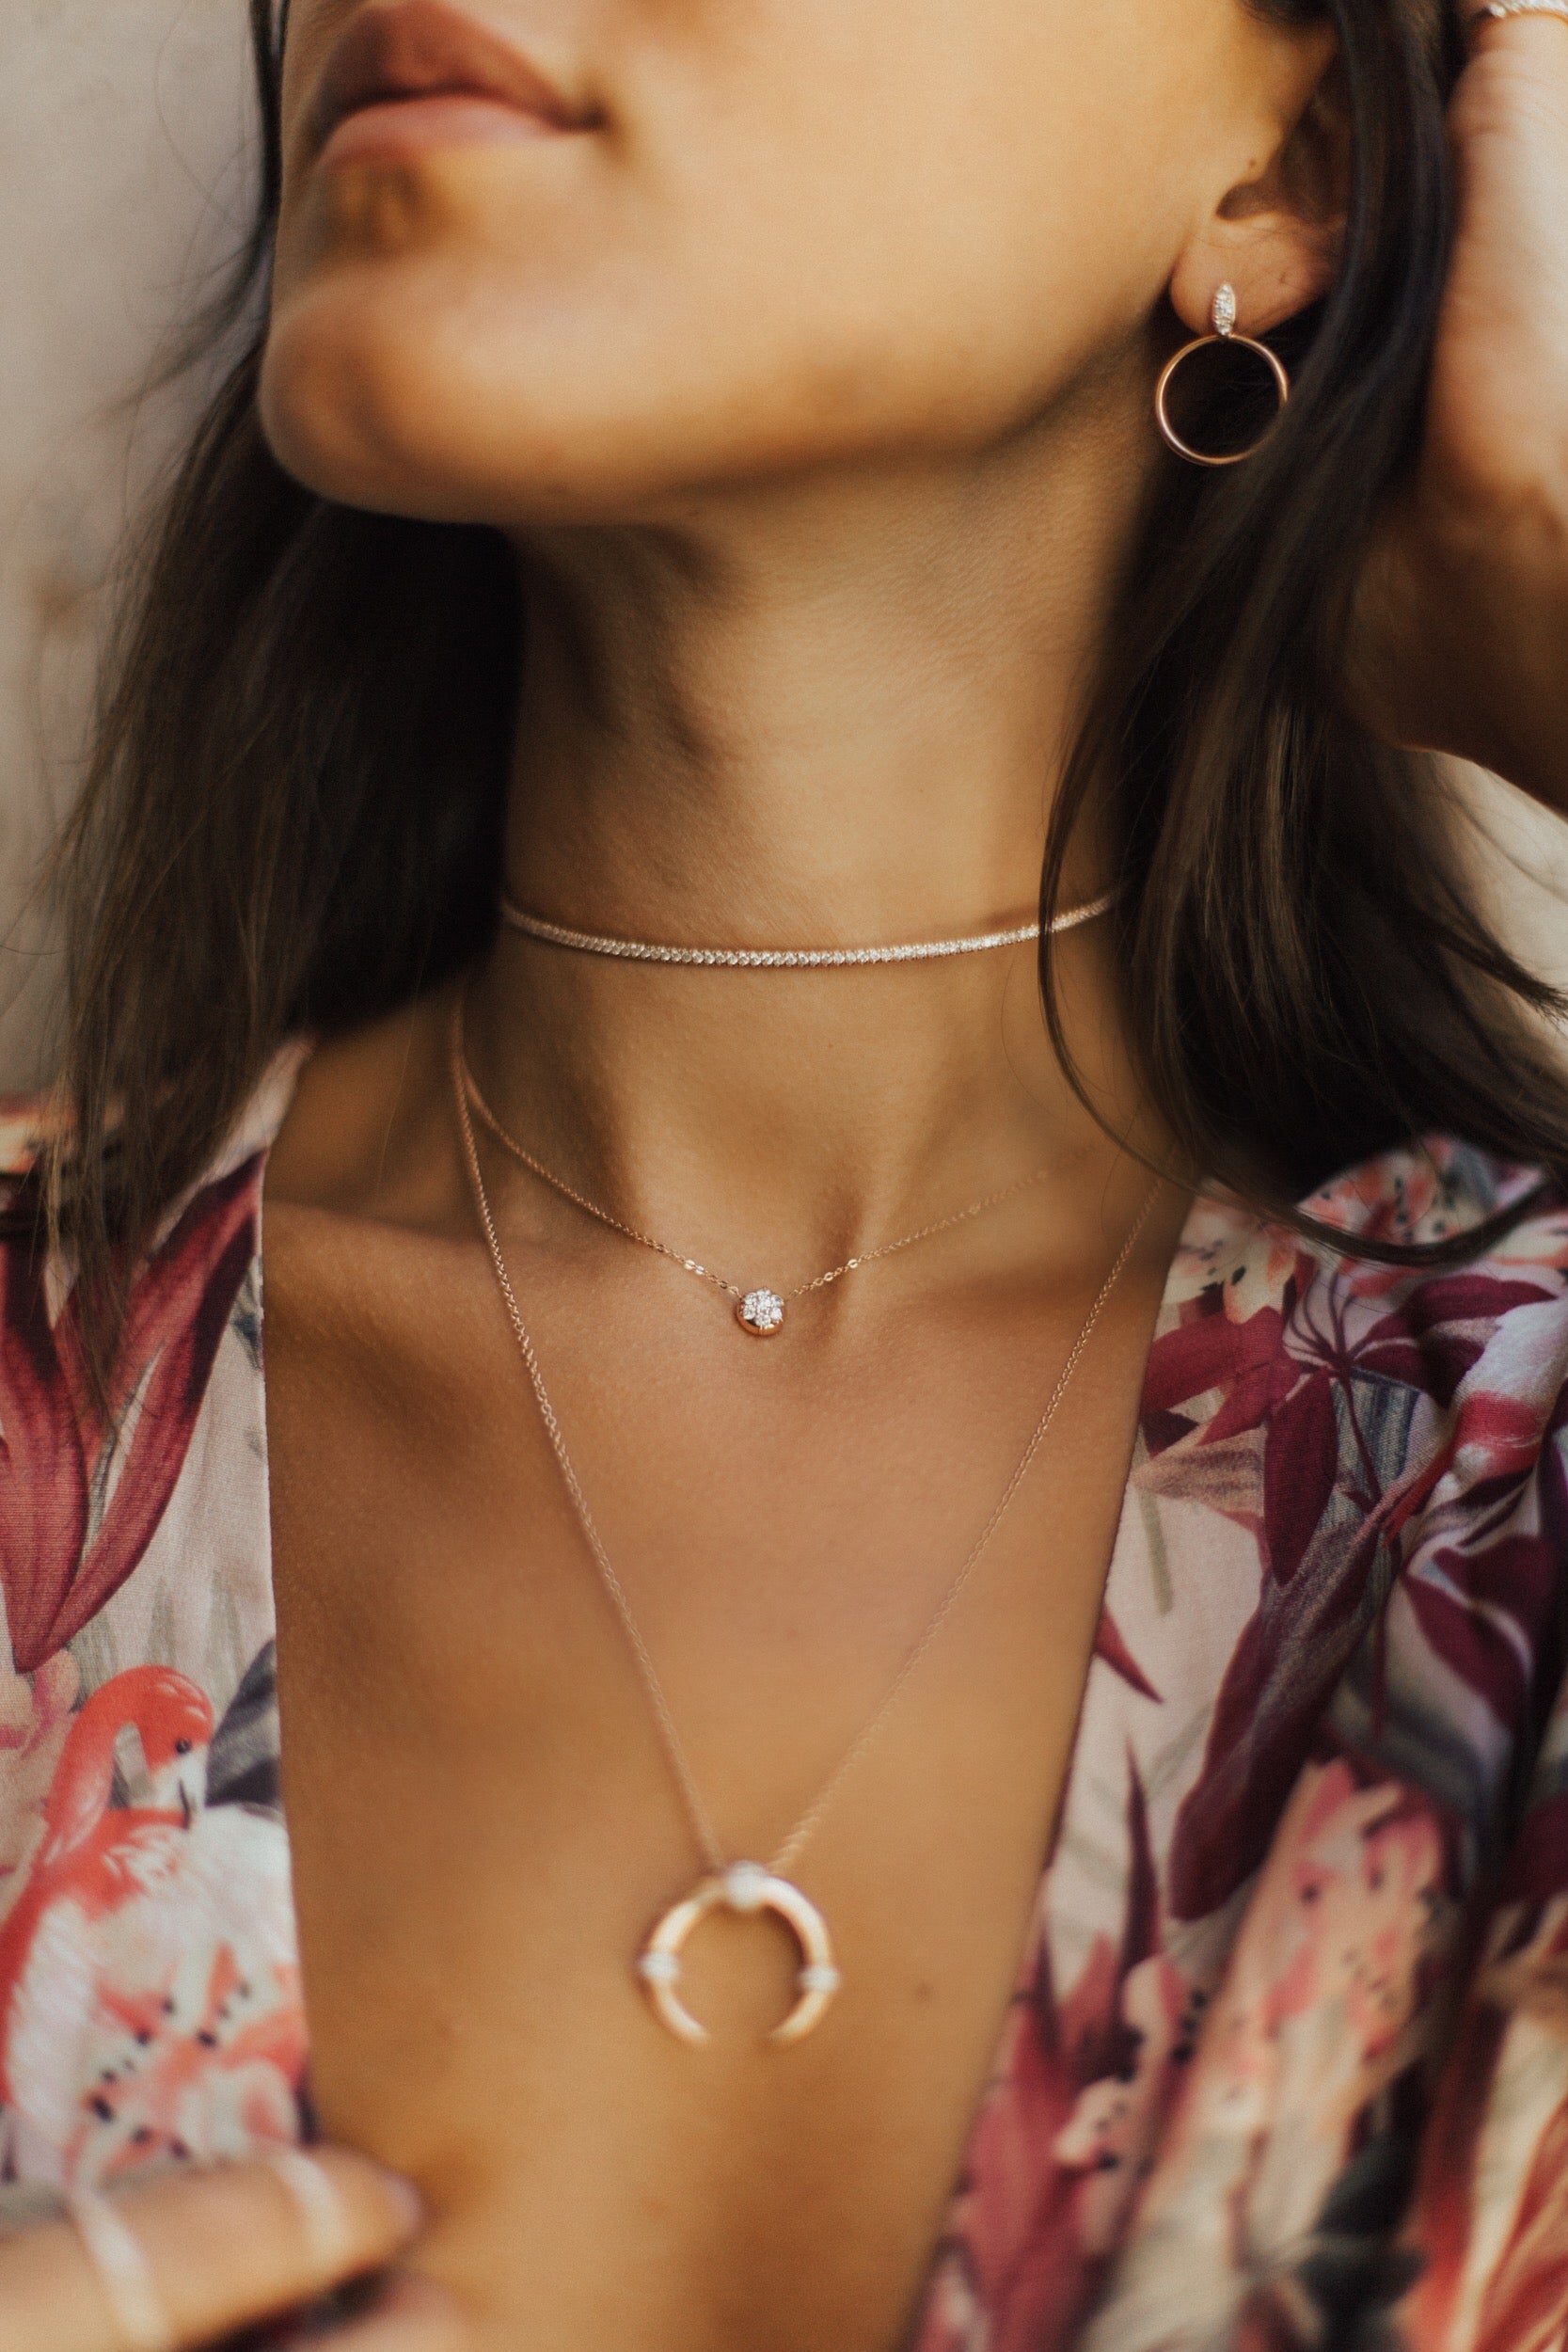 The Bullet Choker Chain shown beautifully layered with the Infinity Choker and Dharma Necklace.